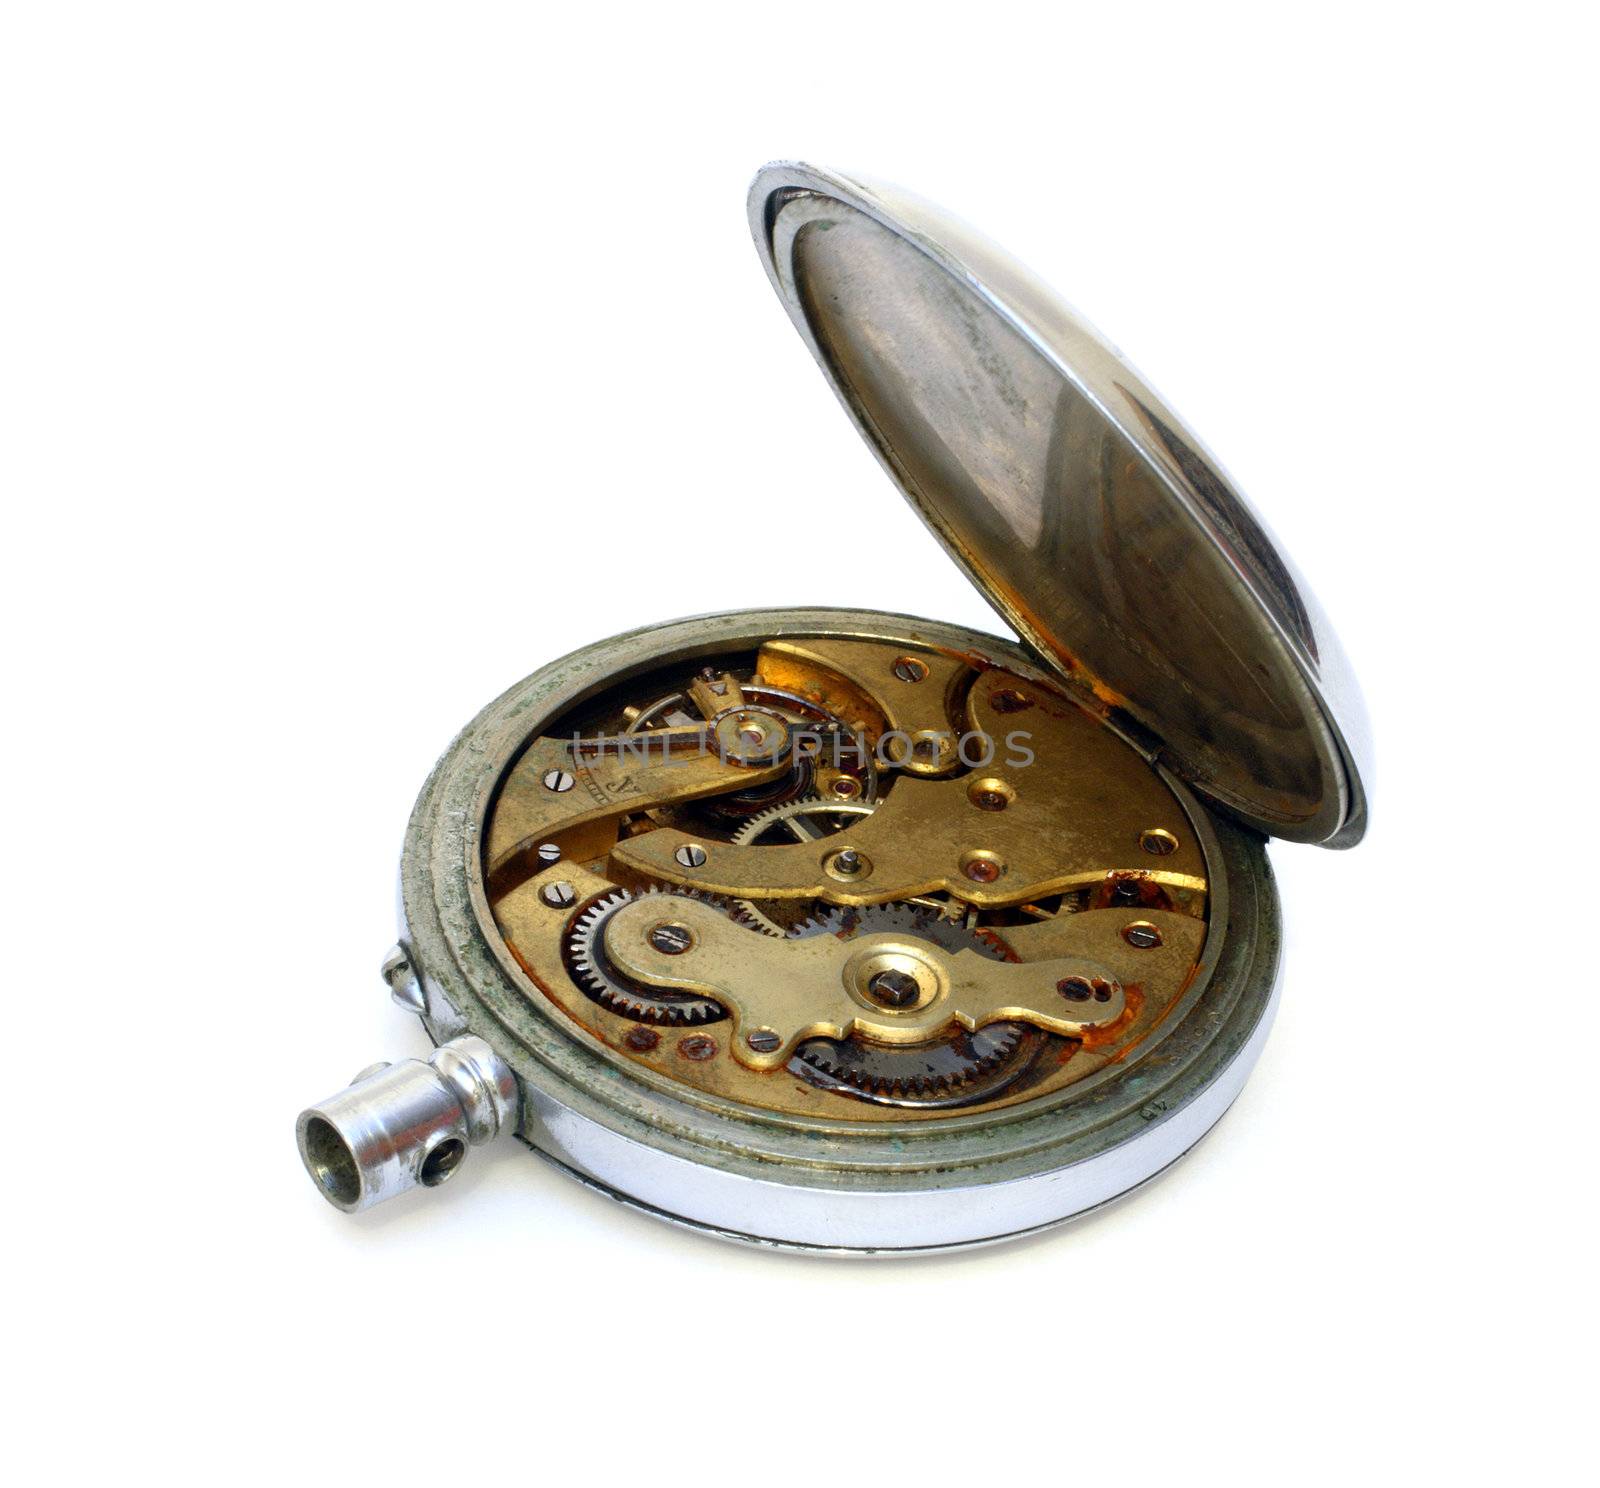 old pocket watch with open cover by Mikko